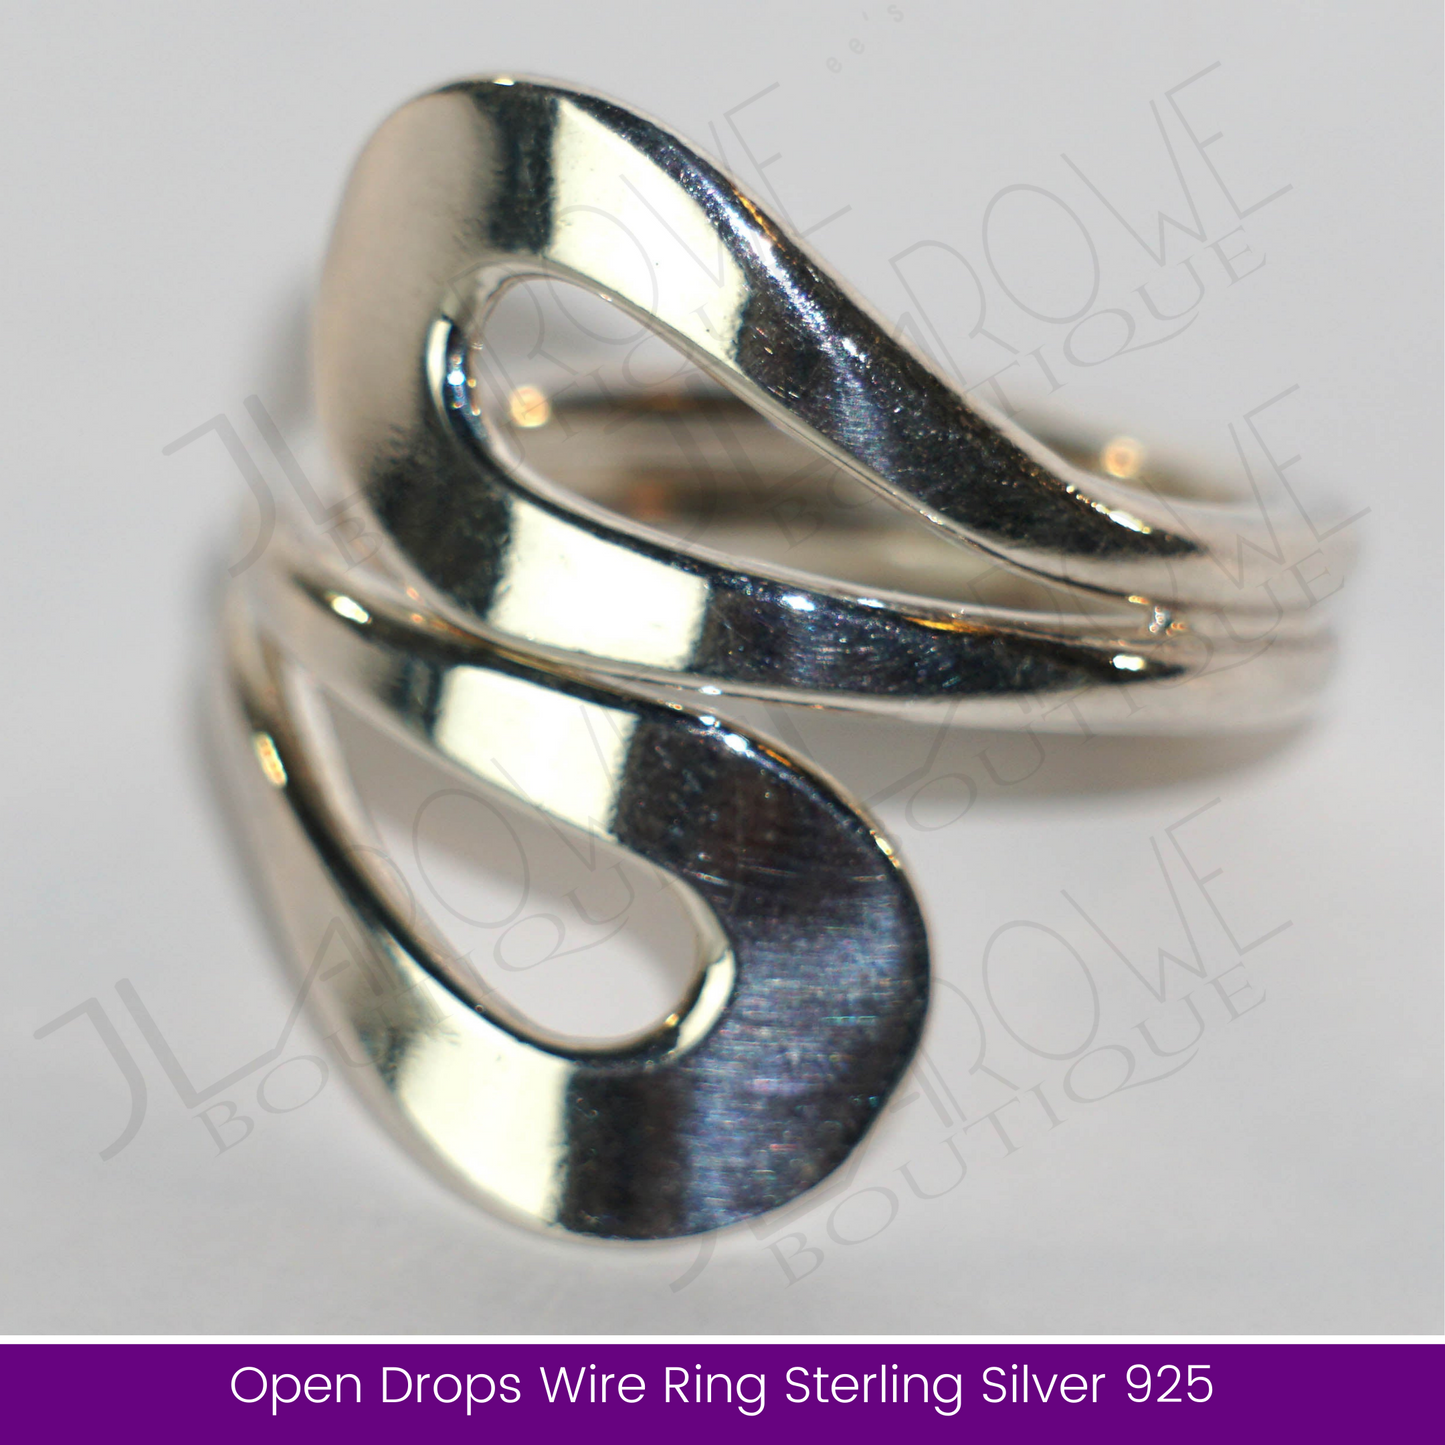 Open Drops Wire Ring Sterling Silver 925 (Limited Stock)